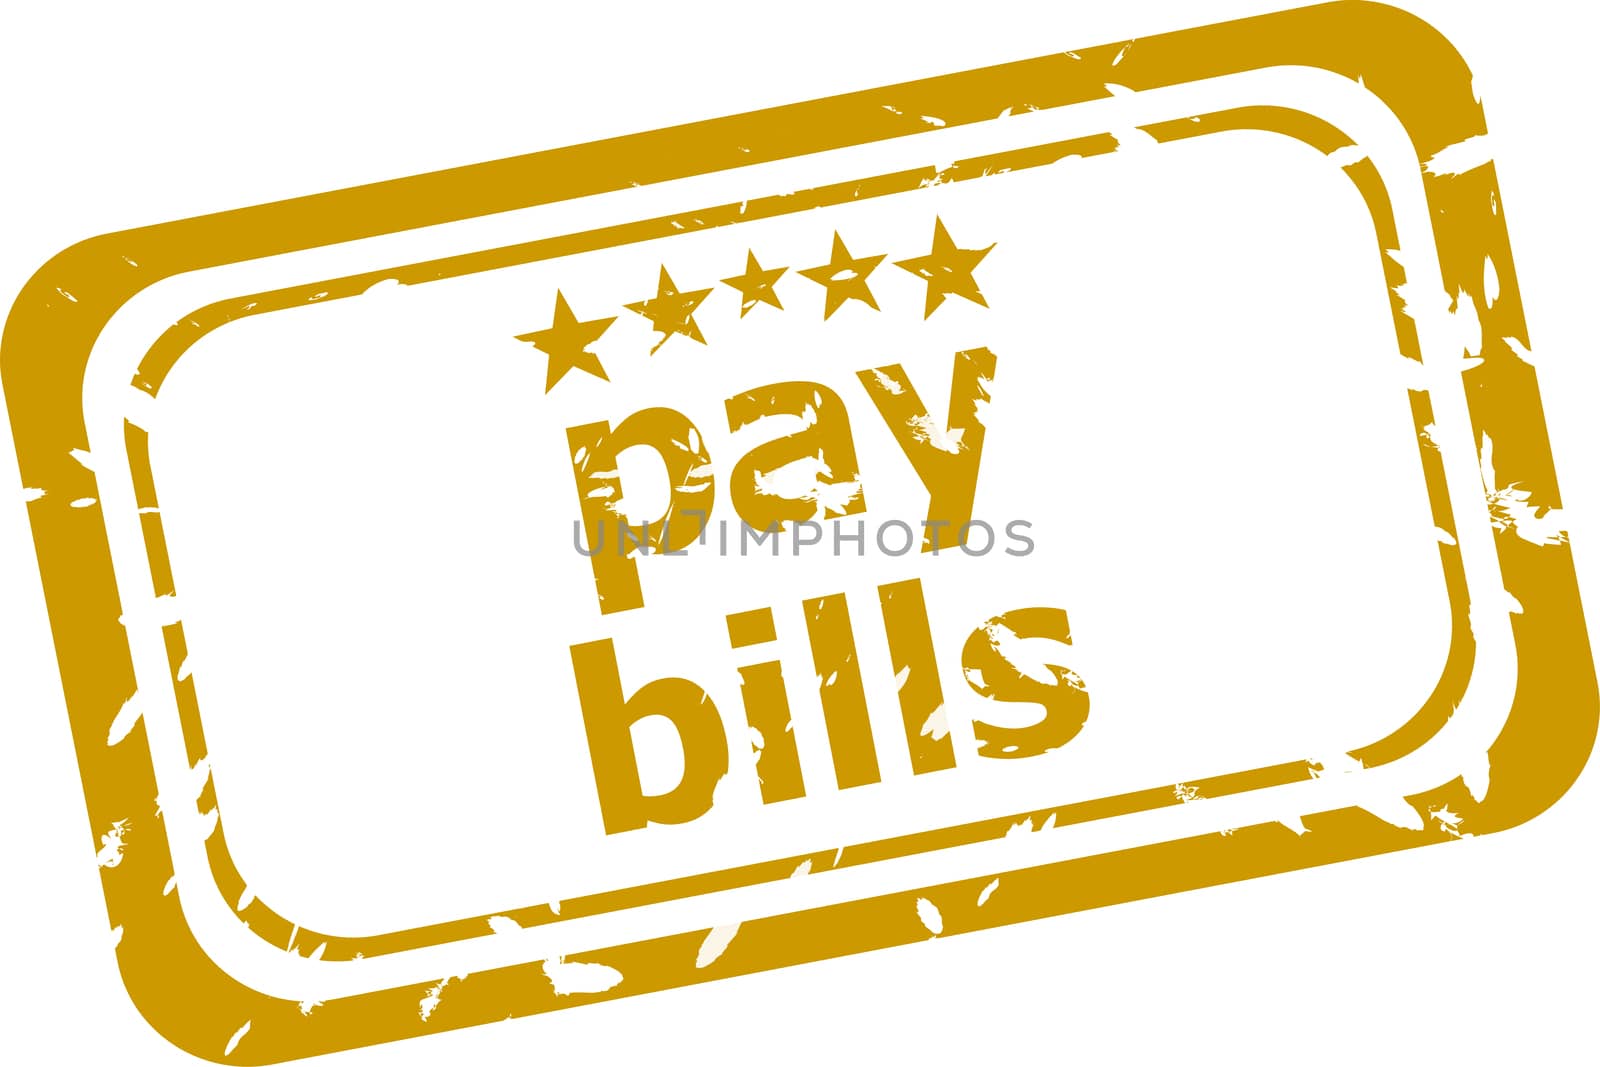 pay bills stamp isolated on white background by fotoscool